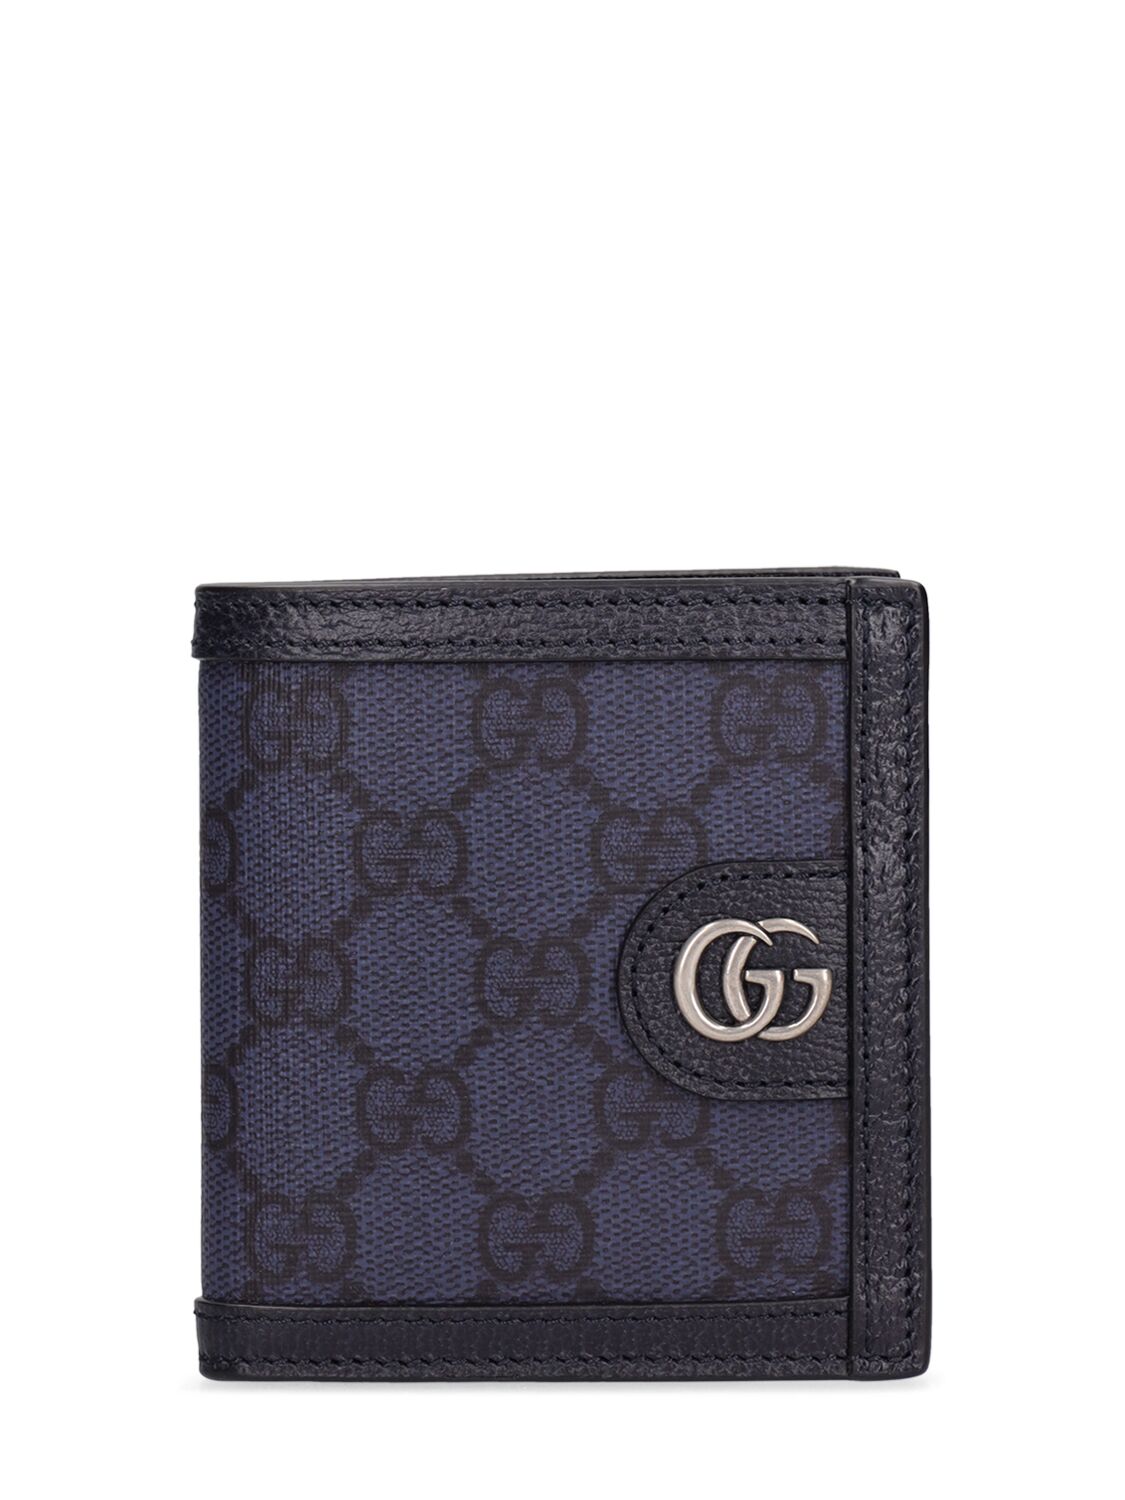 Gucci Ophidia Gg Supreme Wallet In 블루,블랙